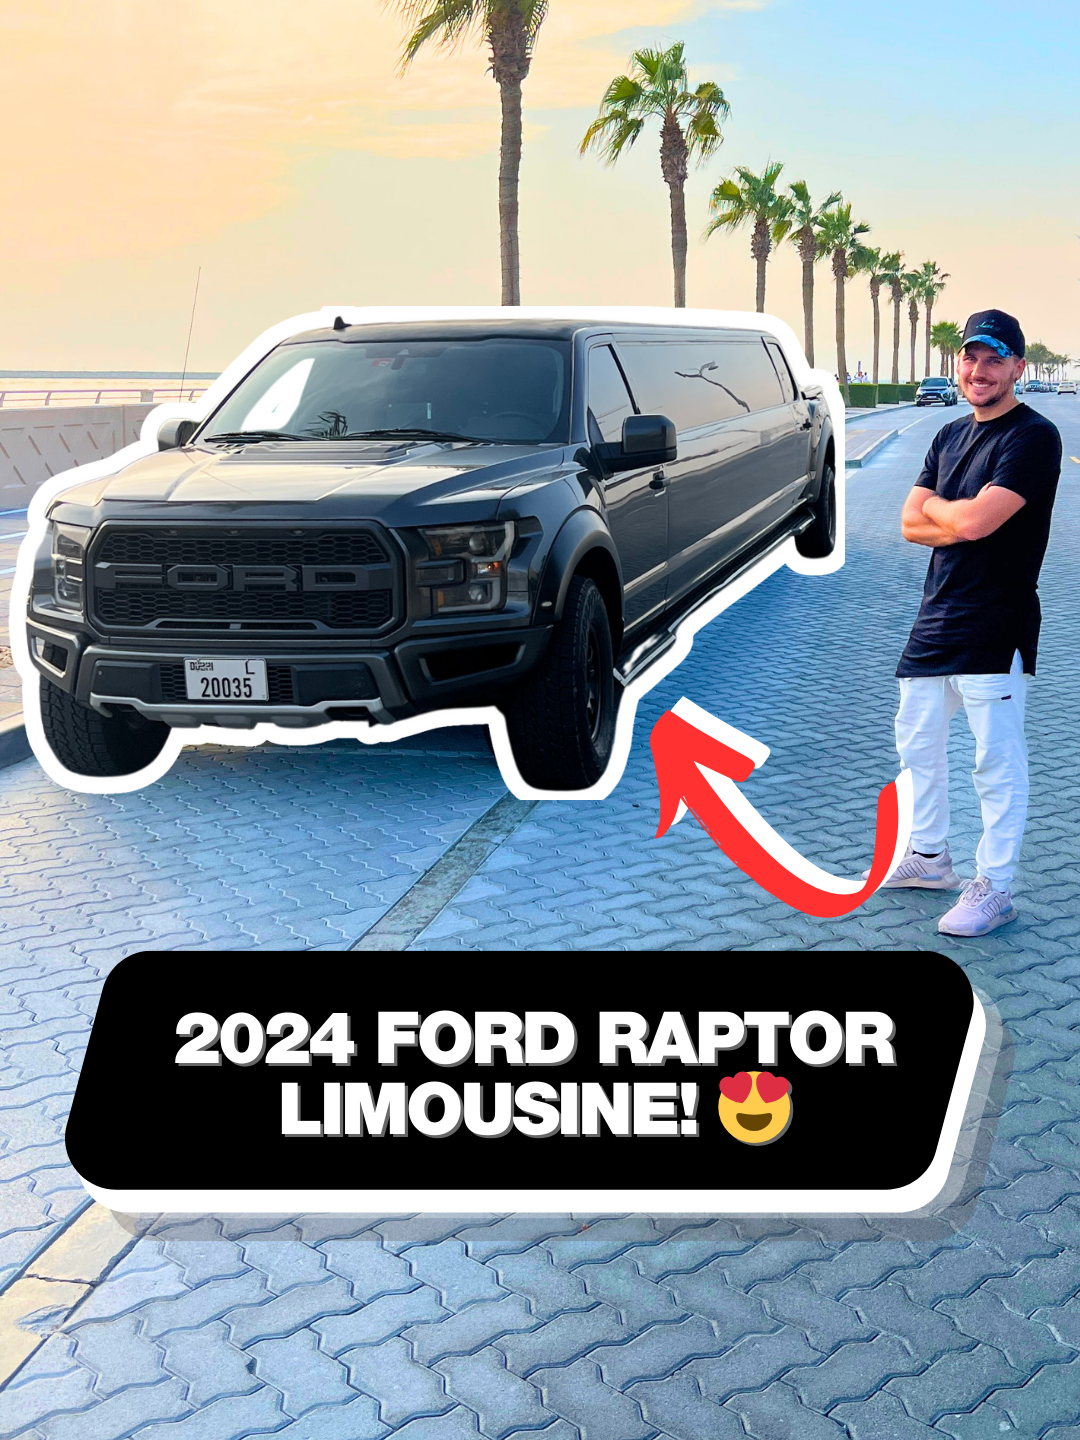 The stretched Ford Raptor is bigger than my living room!! 😅 #raptor #limo #parties